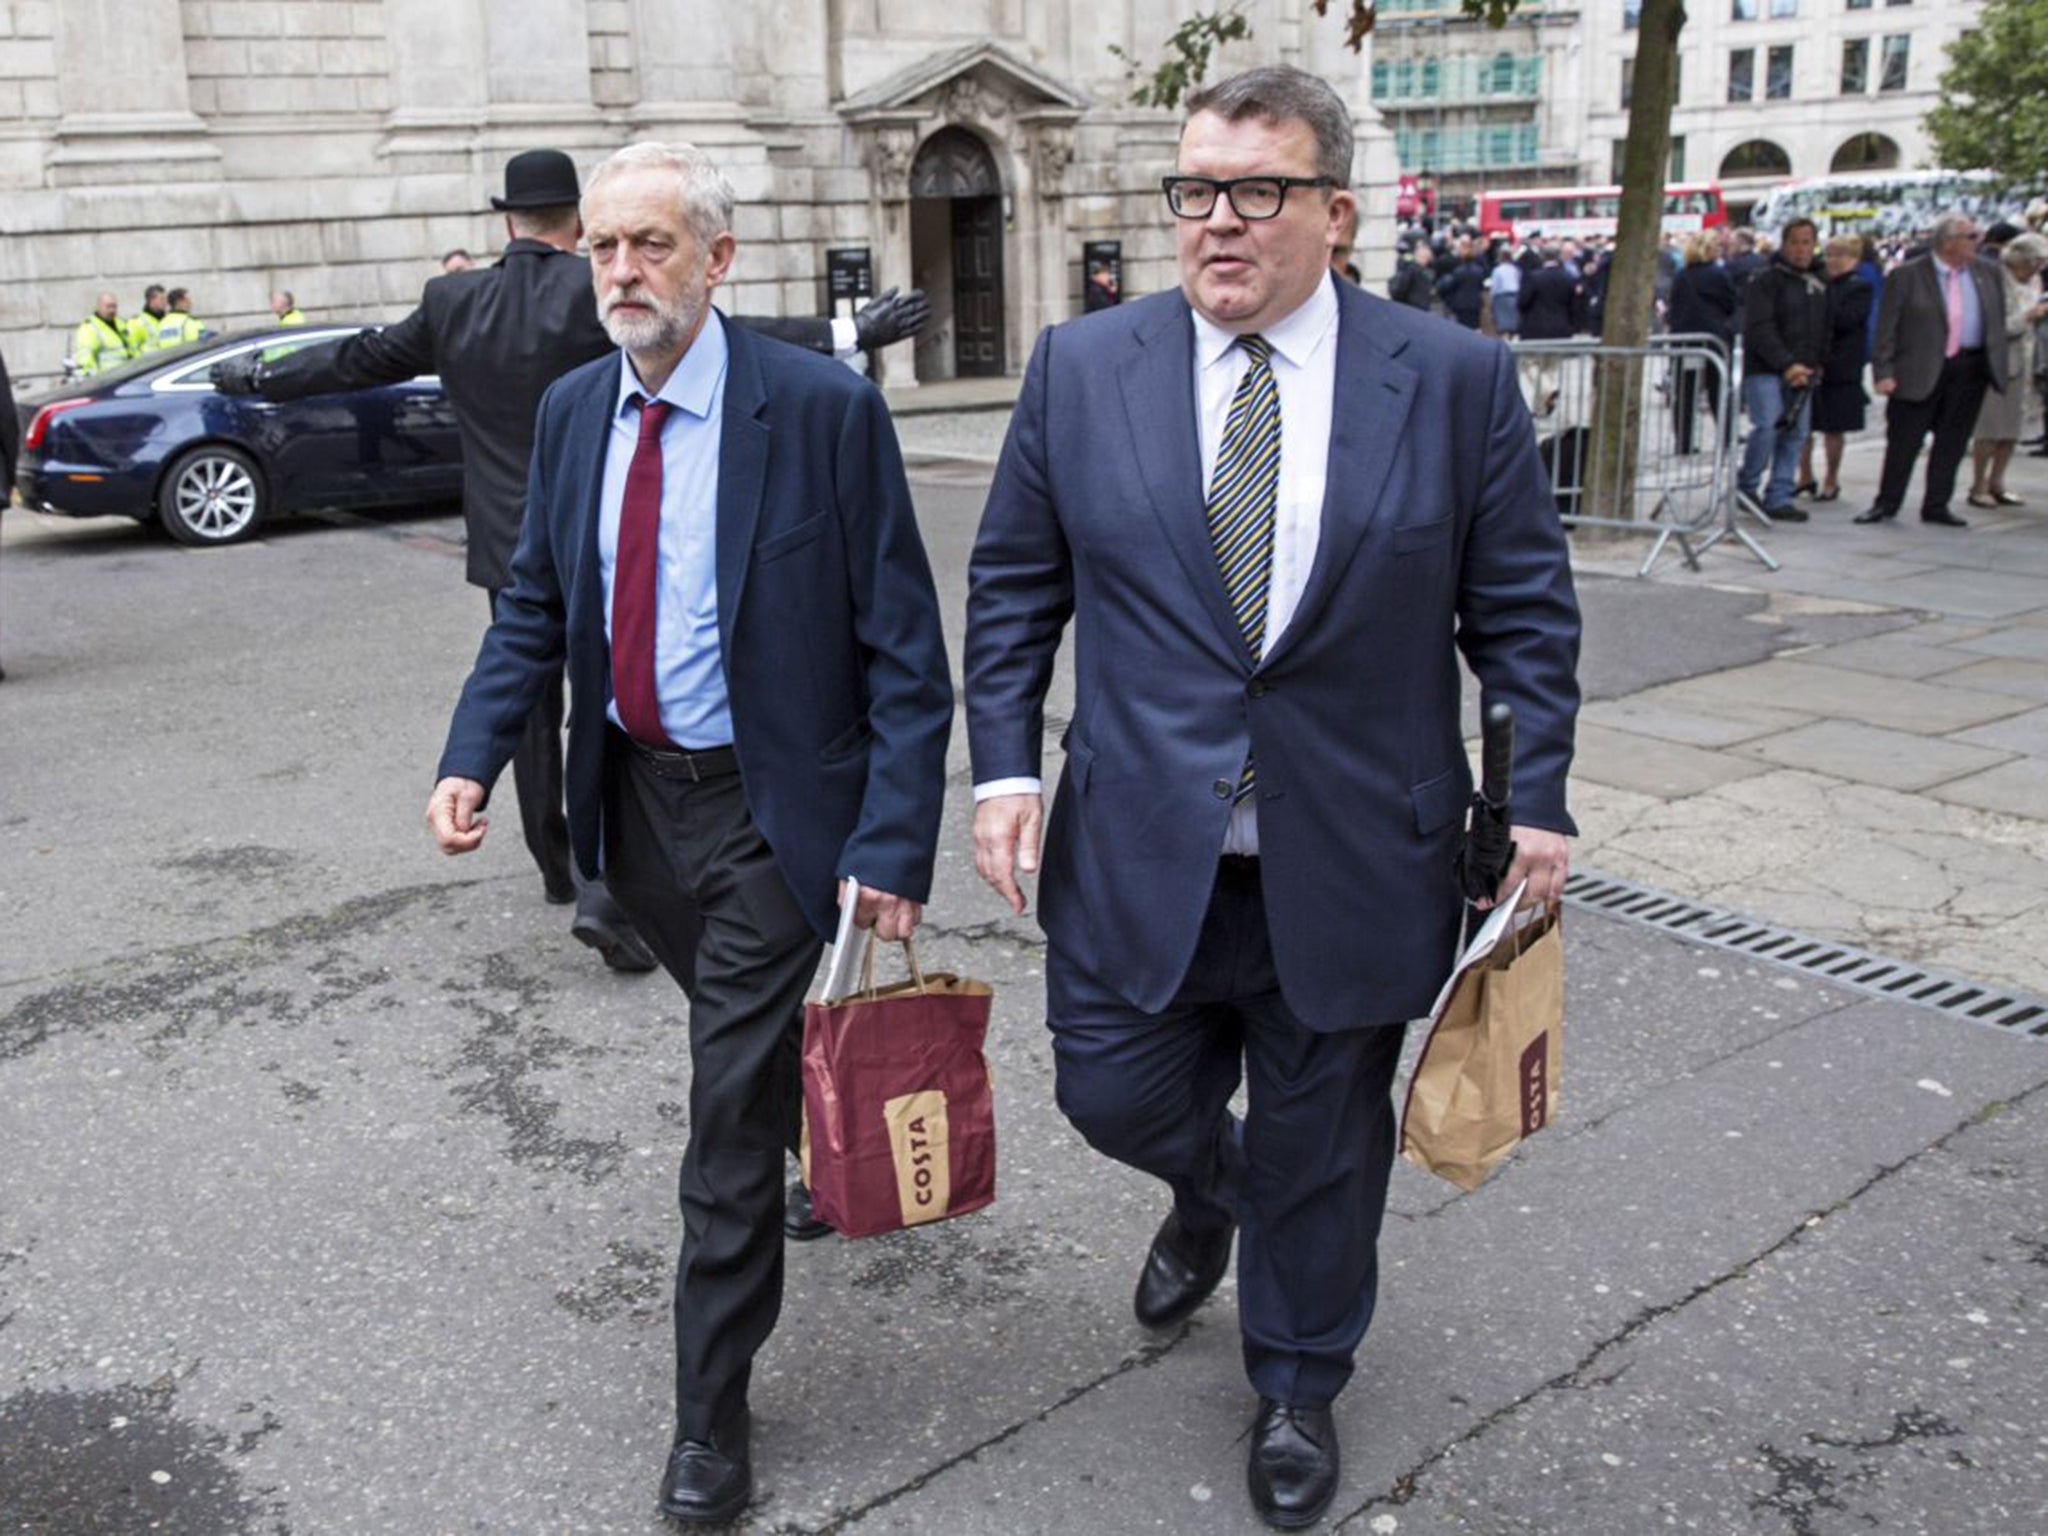 Tom Watson, Labour’s deputy leader, right, said Mr Cameron’s broken promise on the issue would “yet again weaken the public trust in politics”